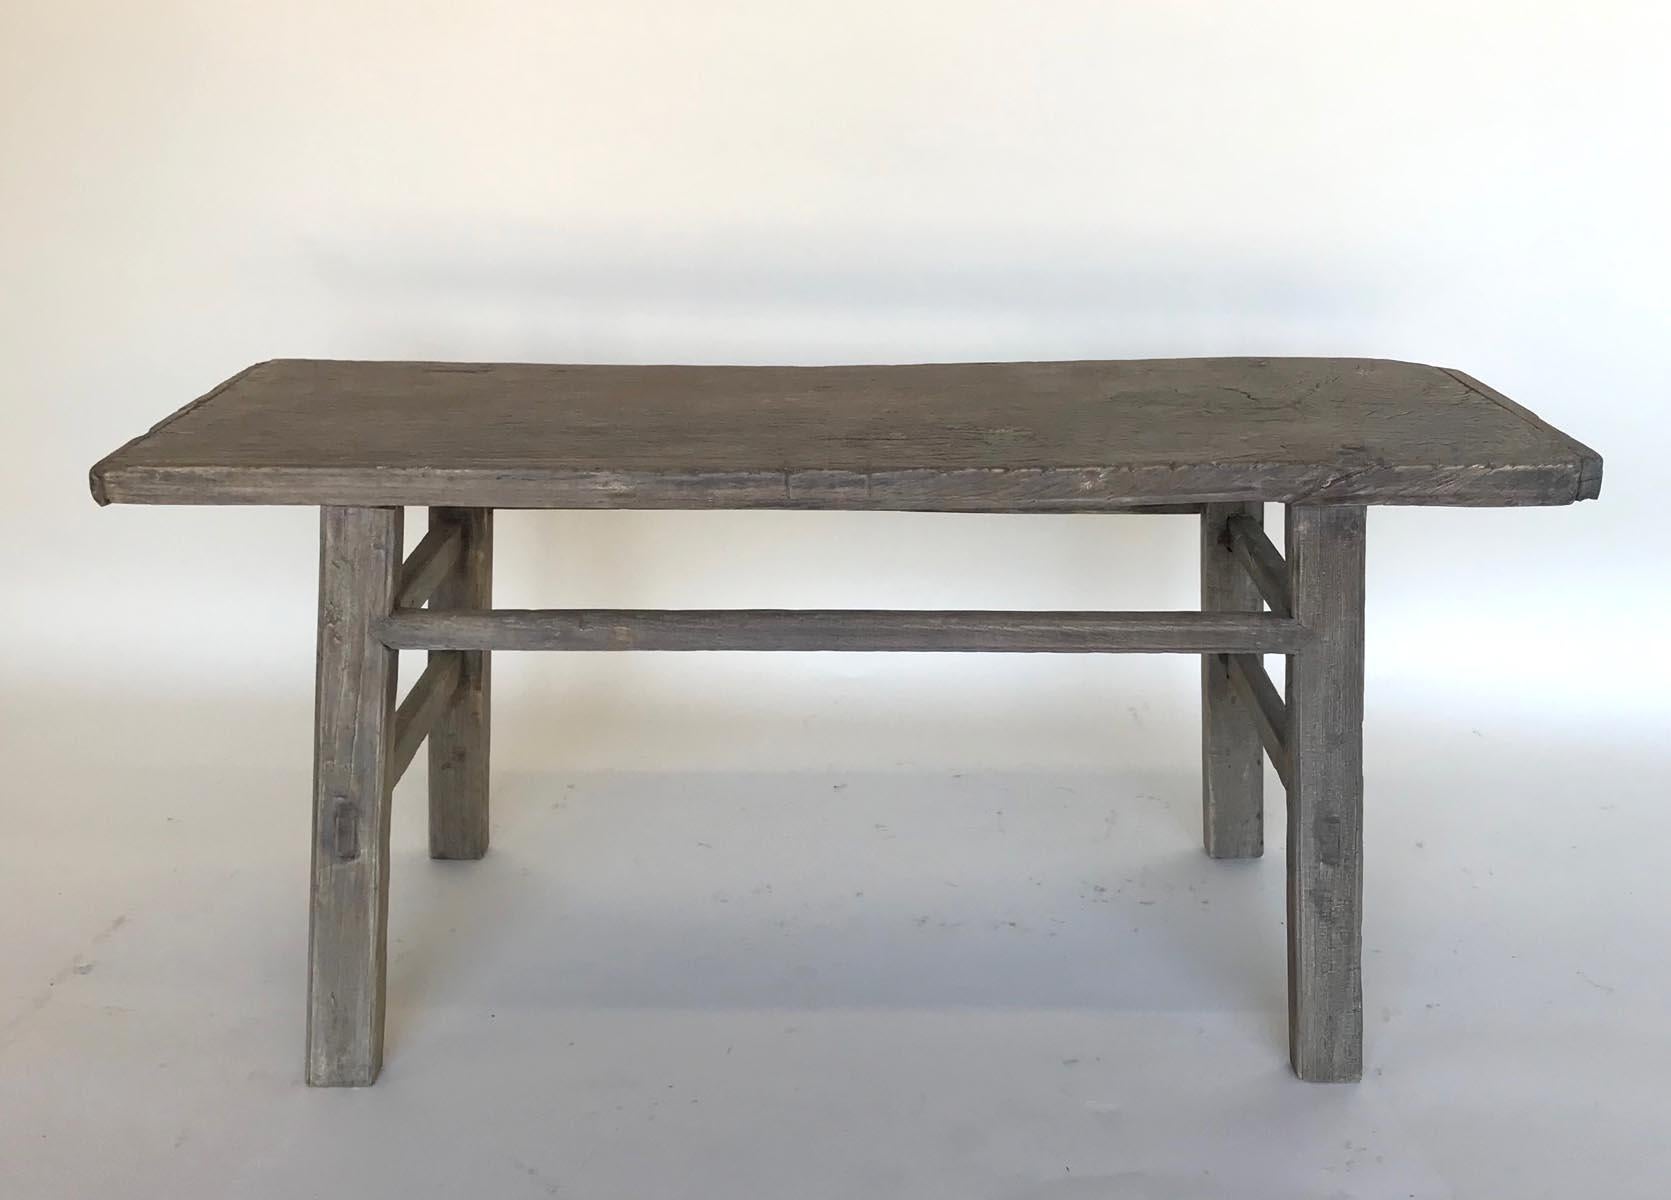 Short vintage elm bench with mortise and tenon construction and double side stretchers. Lovely weathered smooth patina.